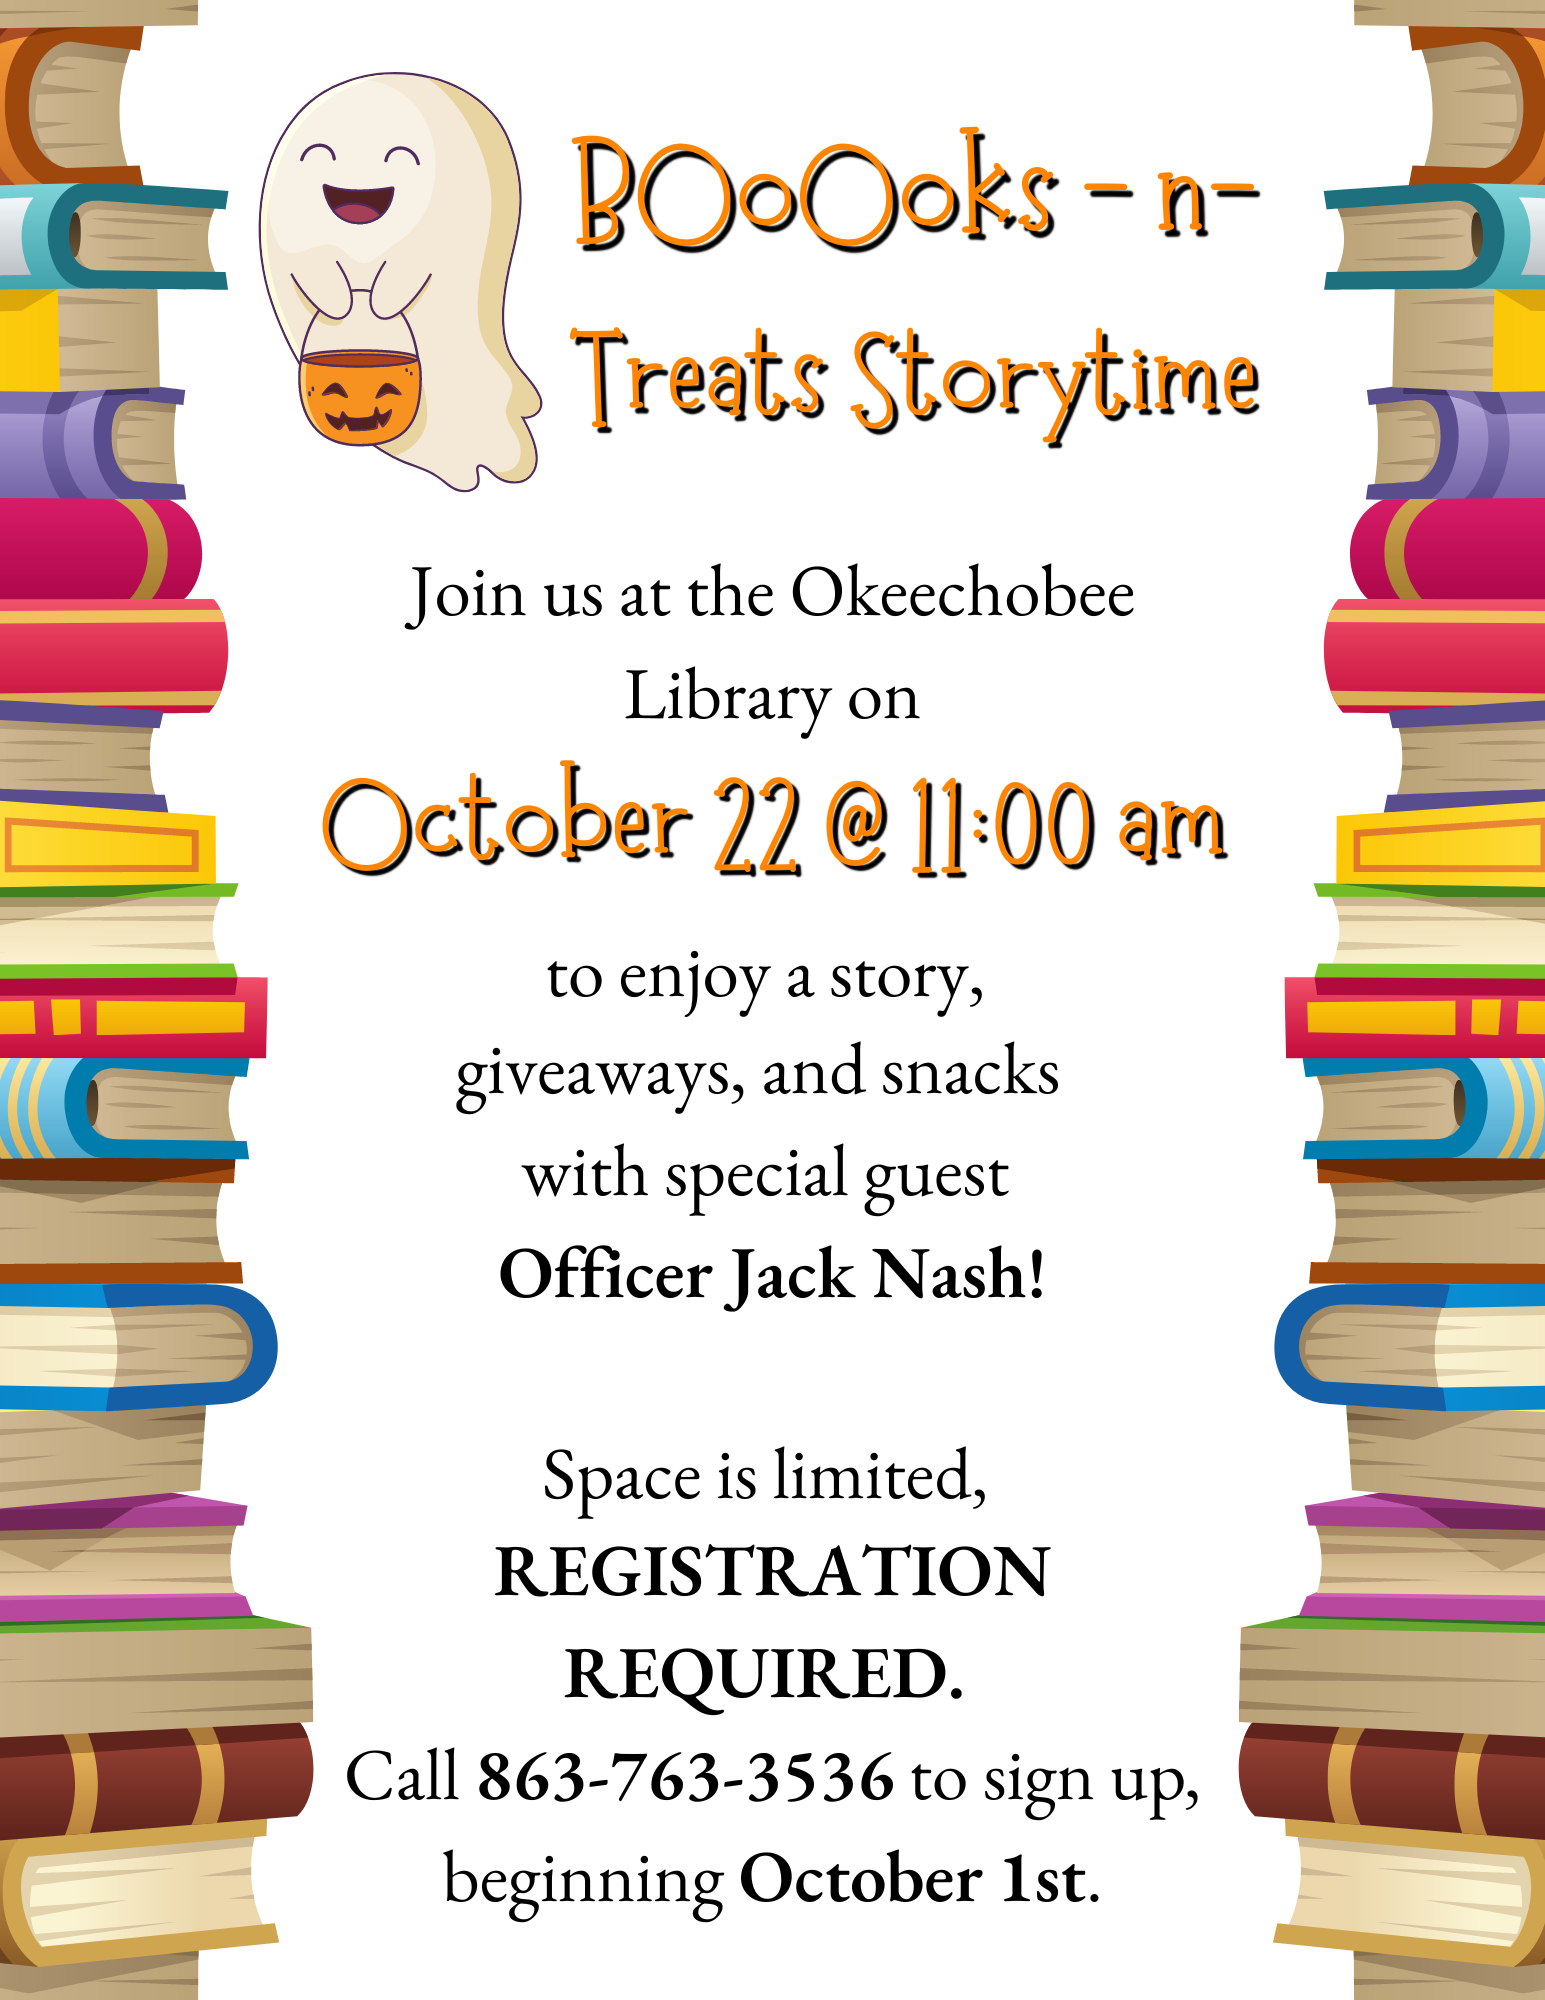 "Join us at the Okeechobee Library on Saturday, September 24th at 11am for our  BoOoOks-n-Treats Storytime! Listen to a story and receive free giveaways and snacks! *SPACE IS LIMITED* REGISTRATION REQUIRED. Call 863-763-3536 to sign up!"